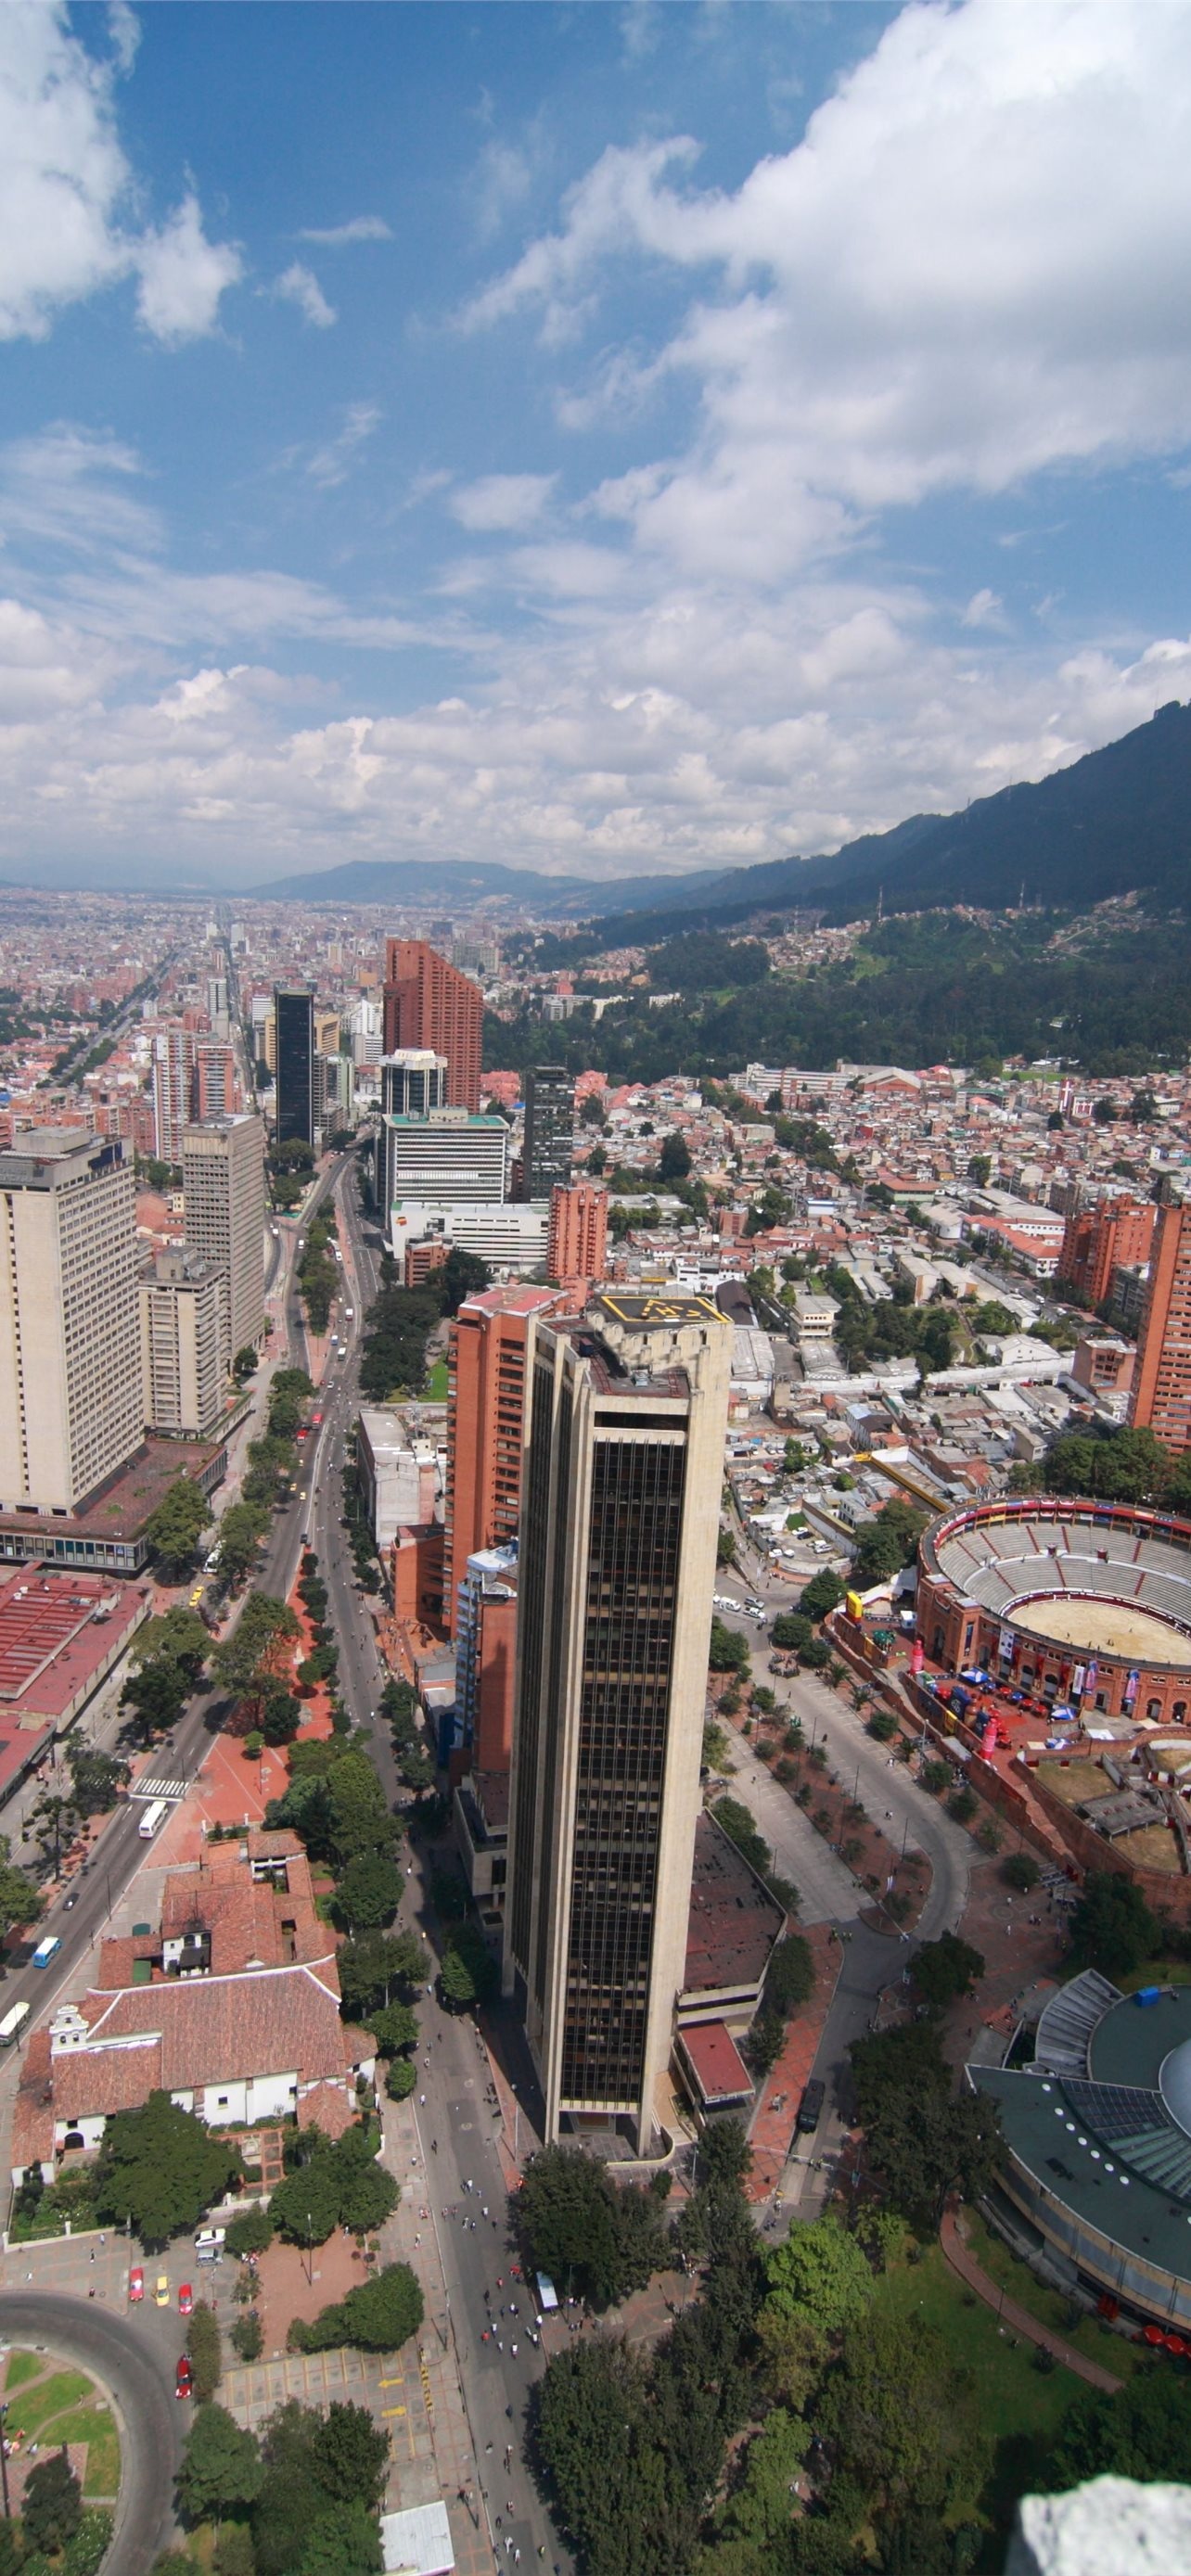 Bogota, Colombia, Latest iPhone HD wallpapers, 1290x2780 HD Phone